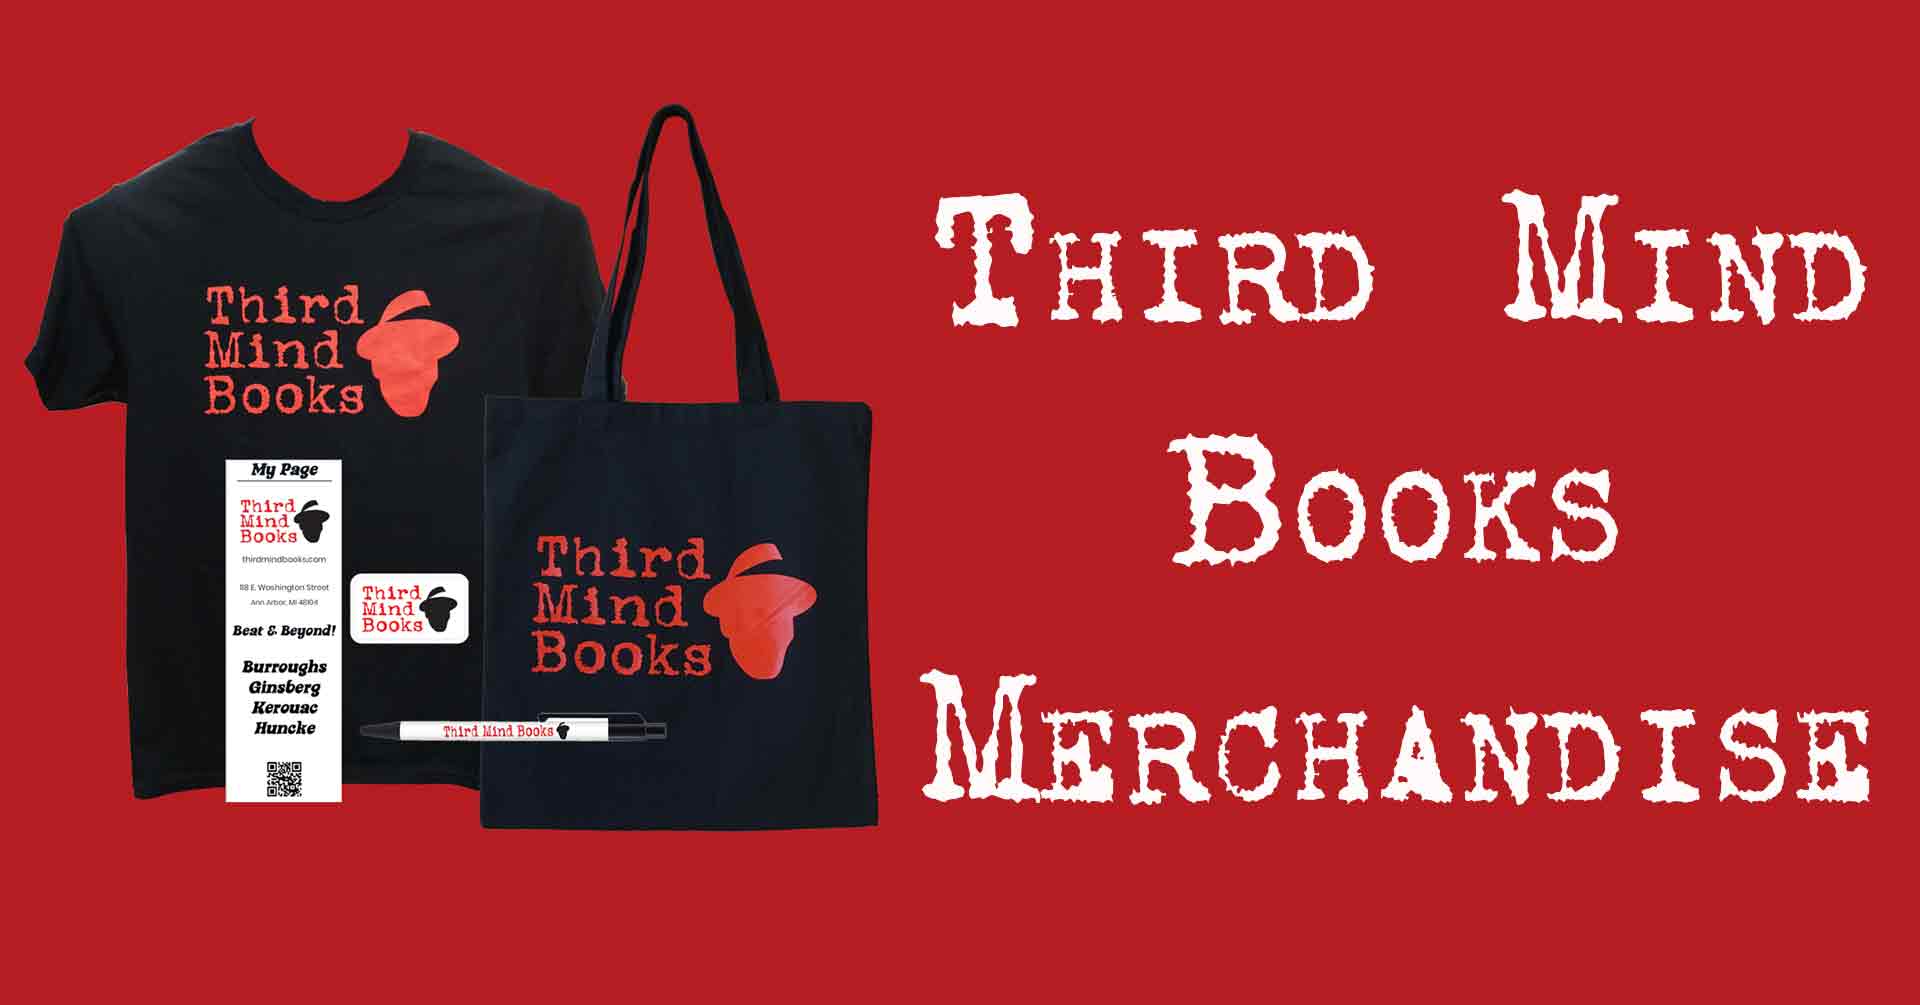 Third Mind Books Merchandise Now Available Online!